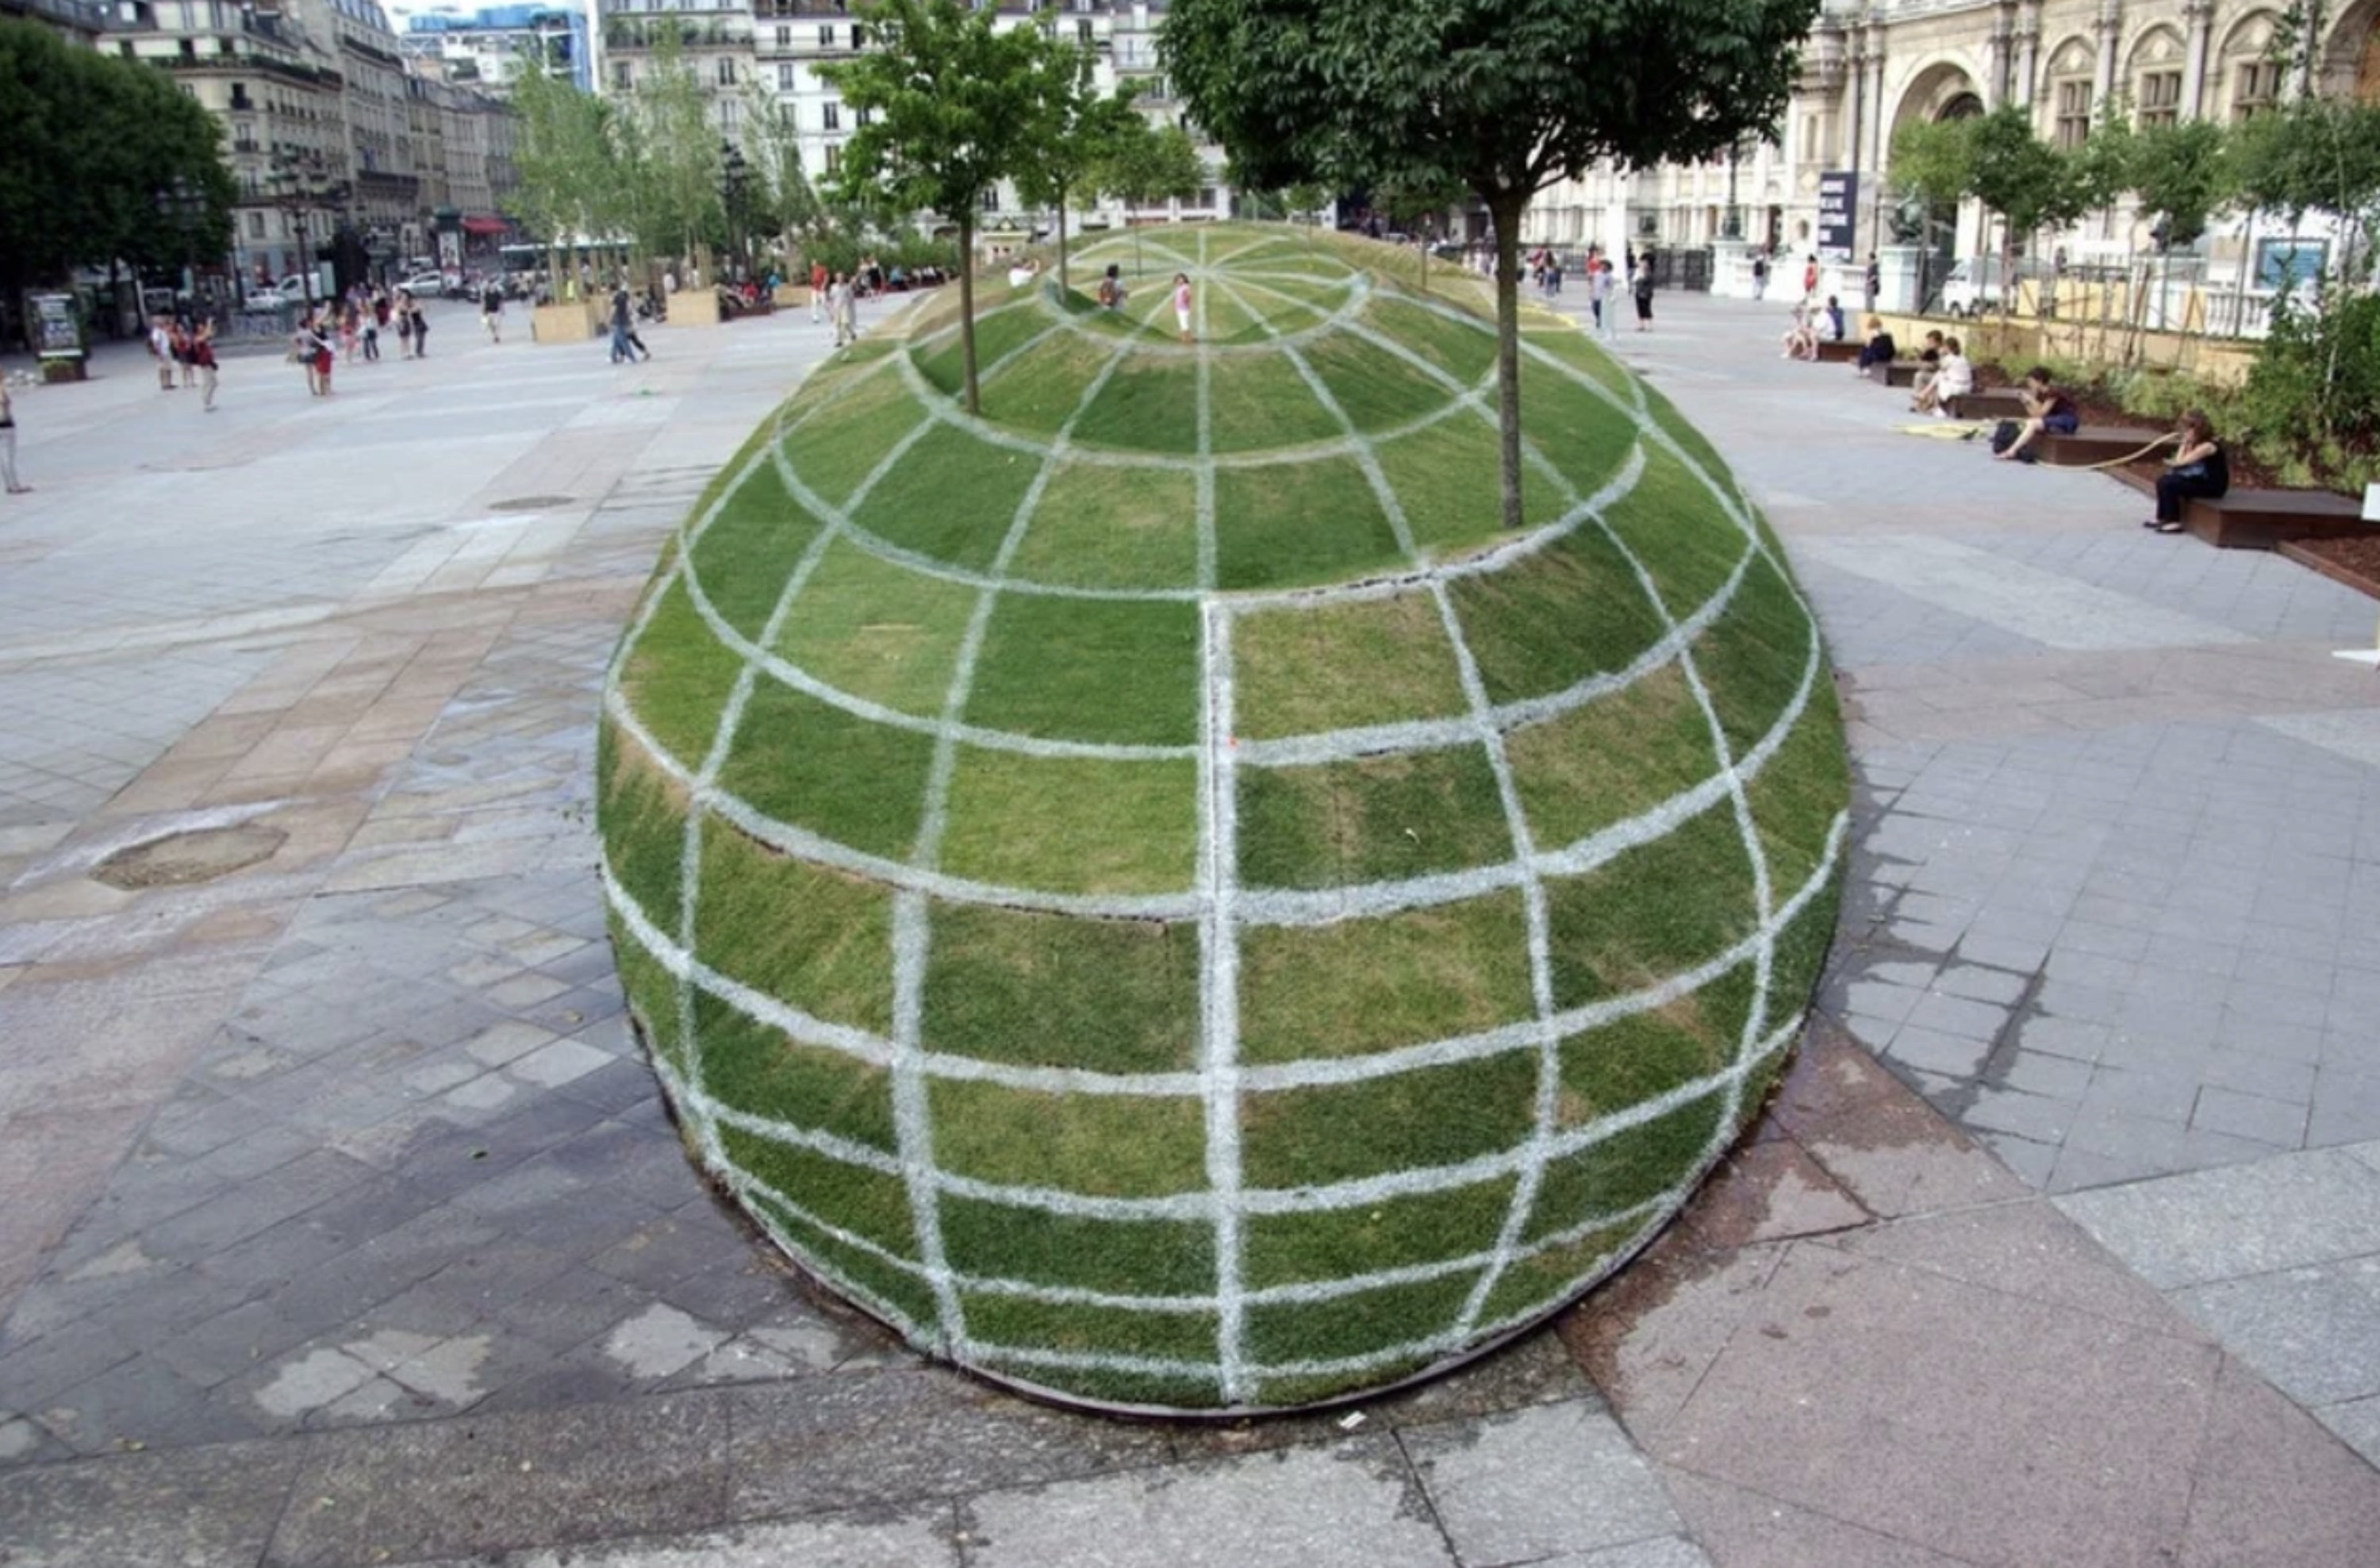 A park that looks like a sphere